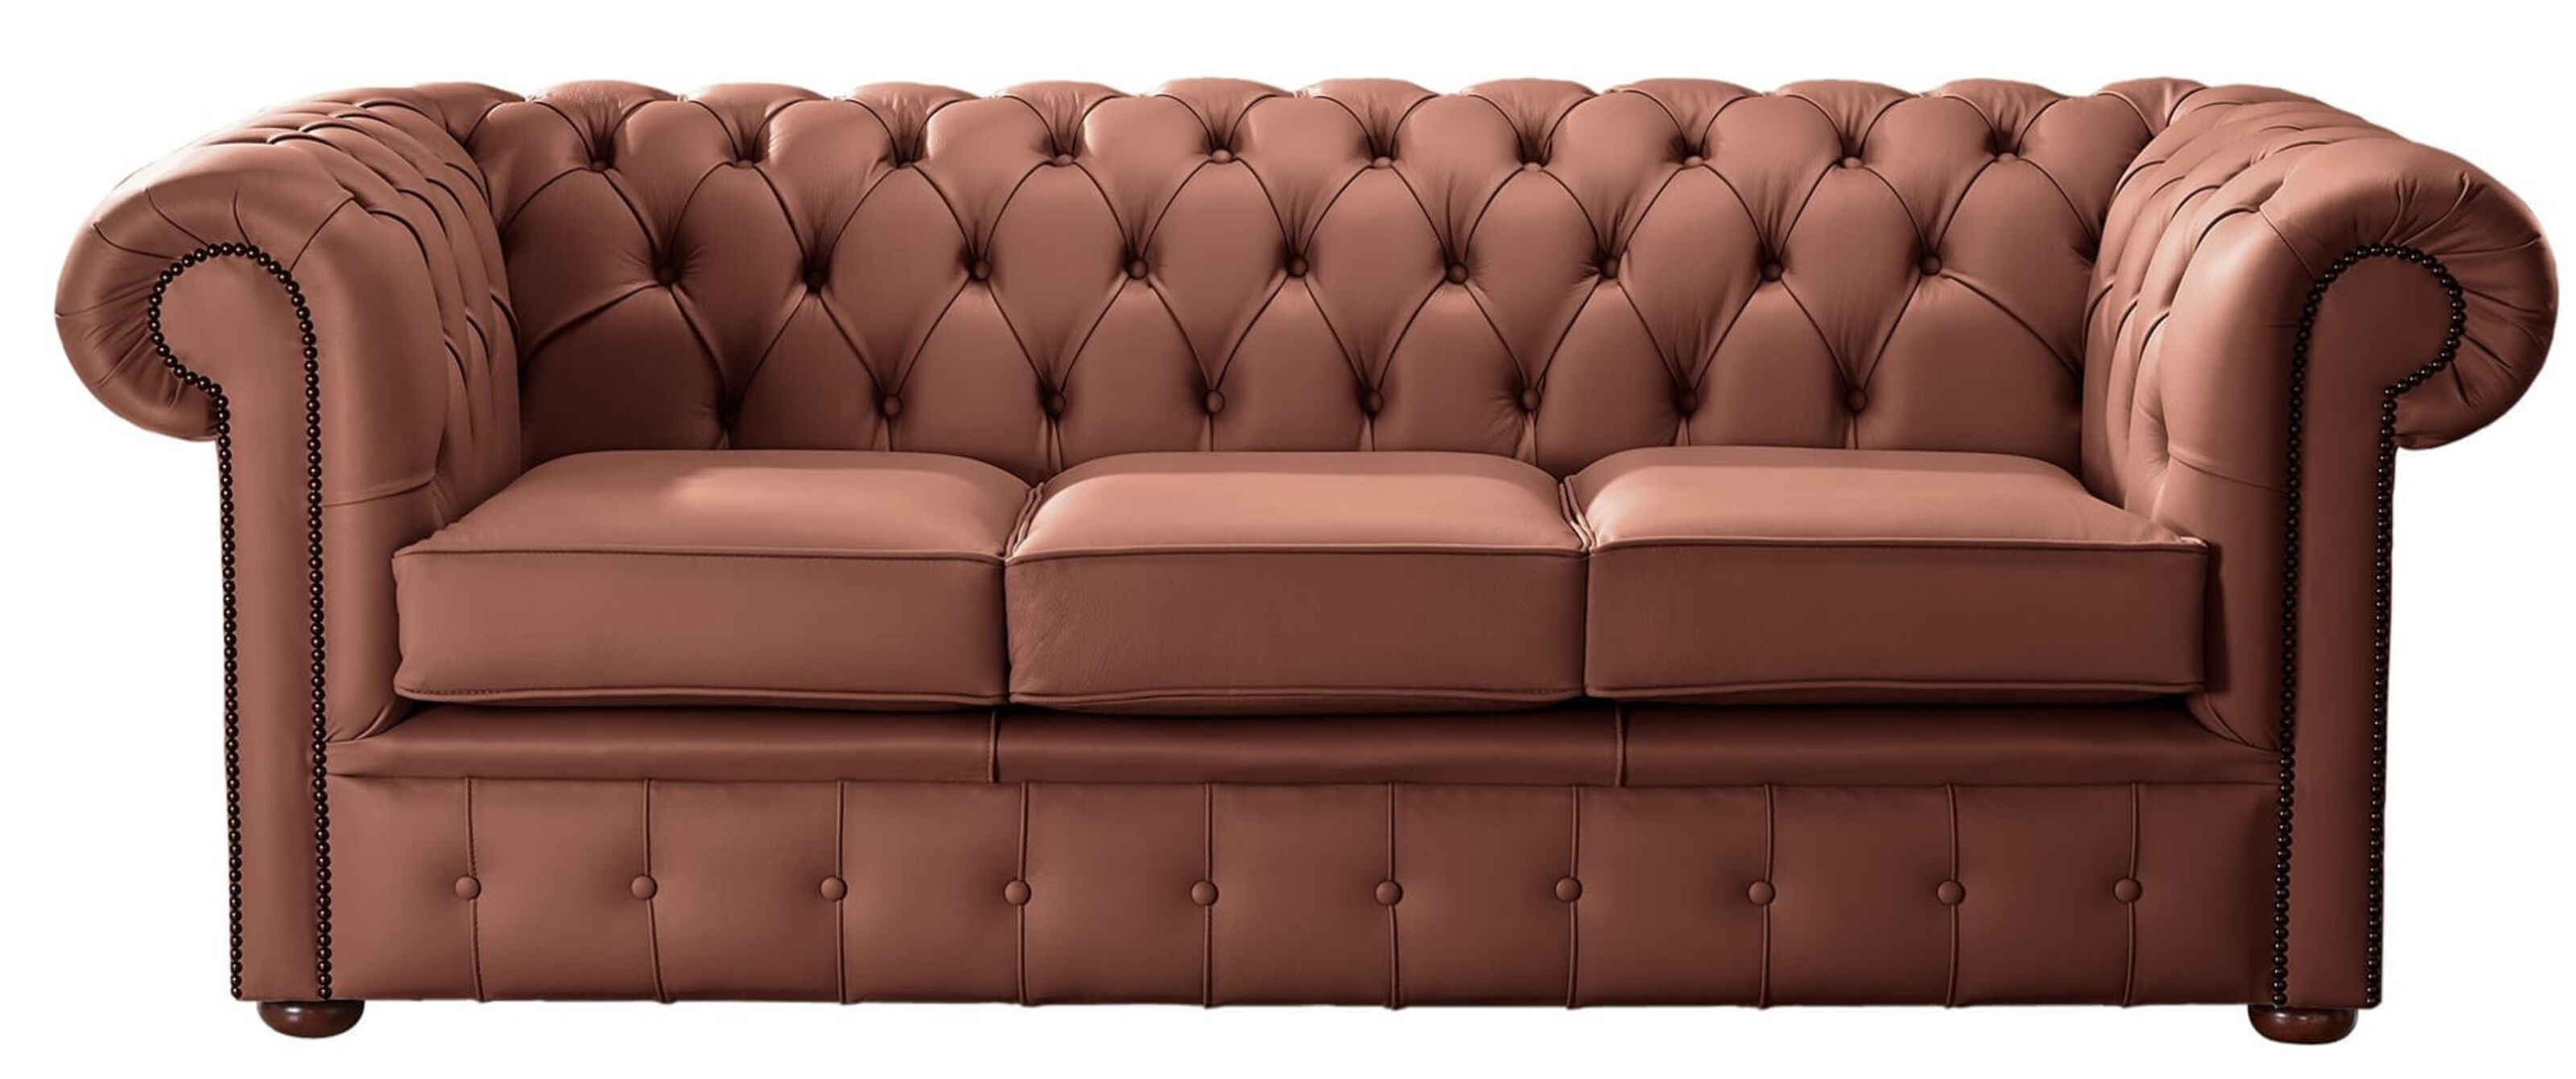 Why a Chesterfield Sofa Bed Should Be Your Next Furniture Crush  %Post Title